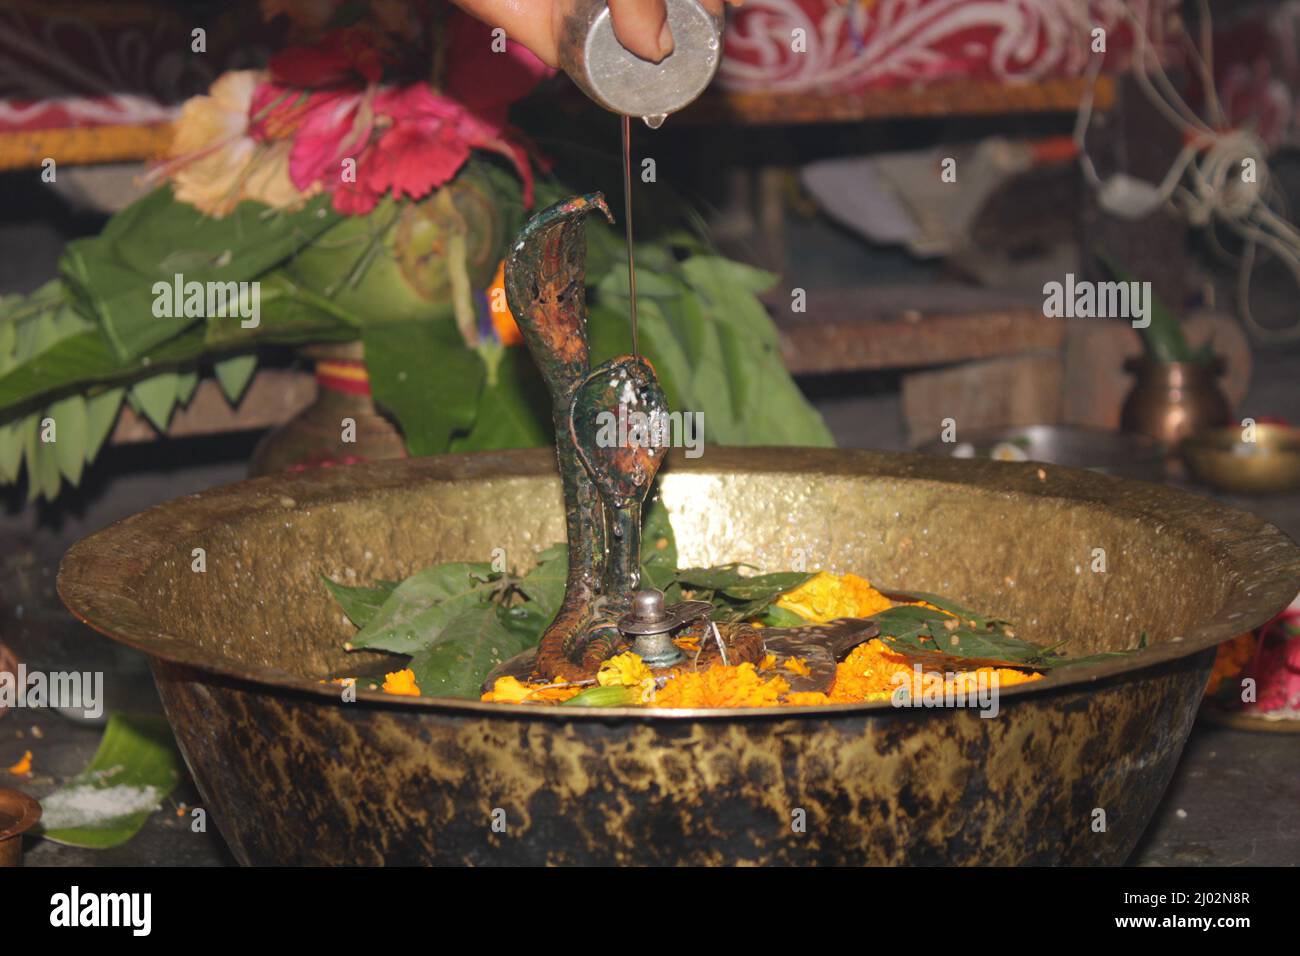 Hindu Devotees offering milk And Water to Shiv Lingam on occasion of Abhishekam in India . Offering Flower and bael leafs to the Lord shiva ,India Stock Photo